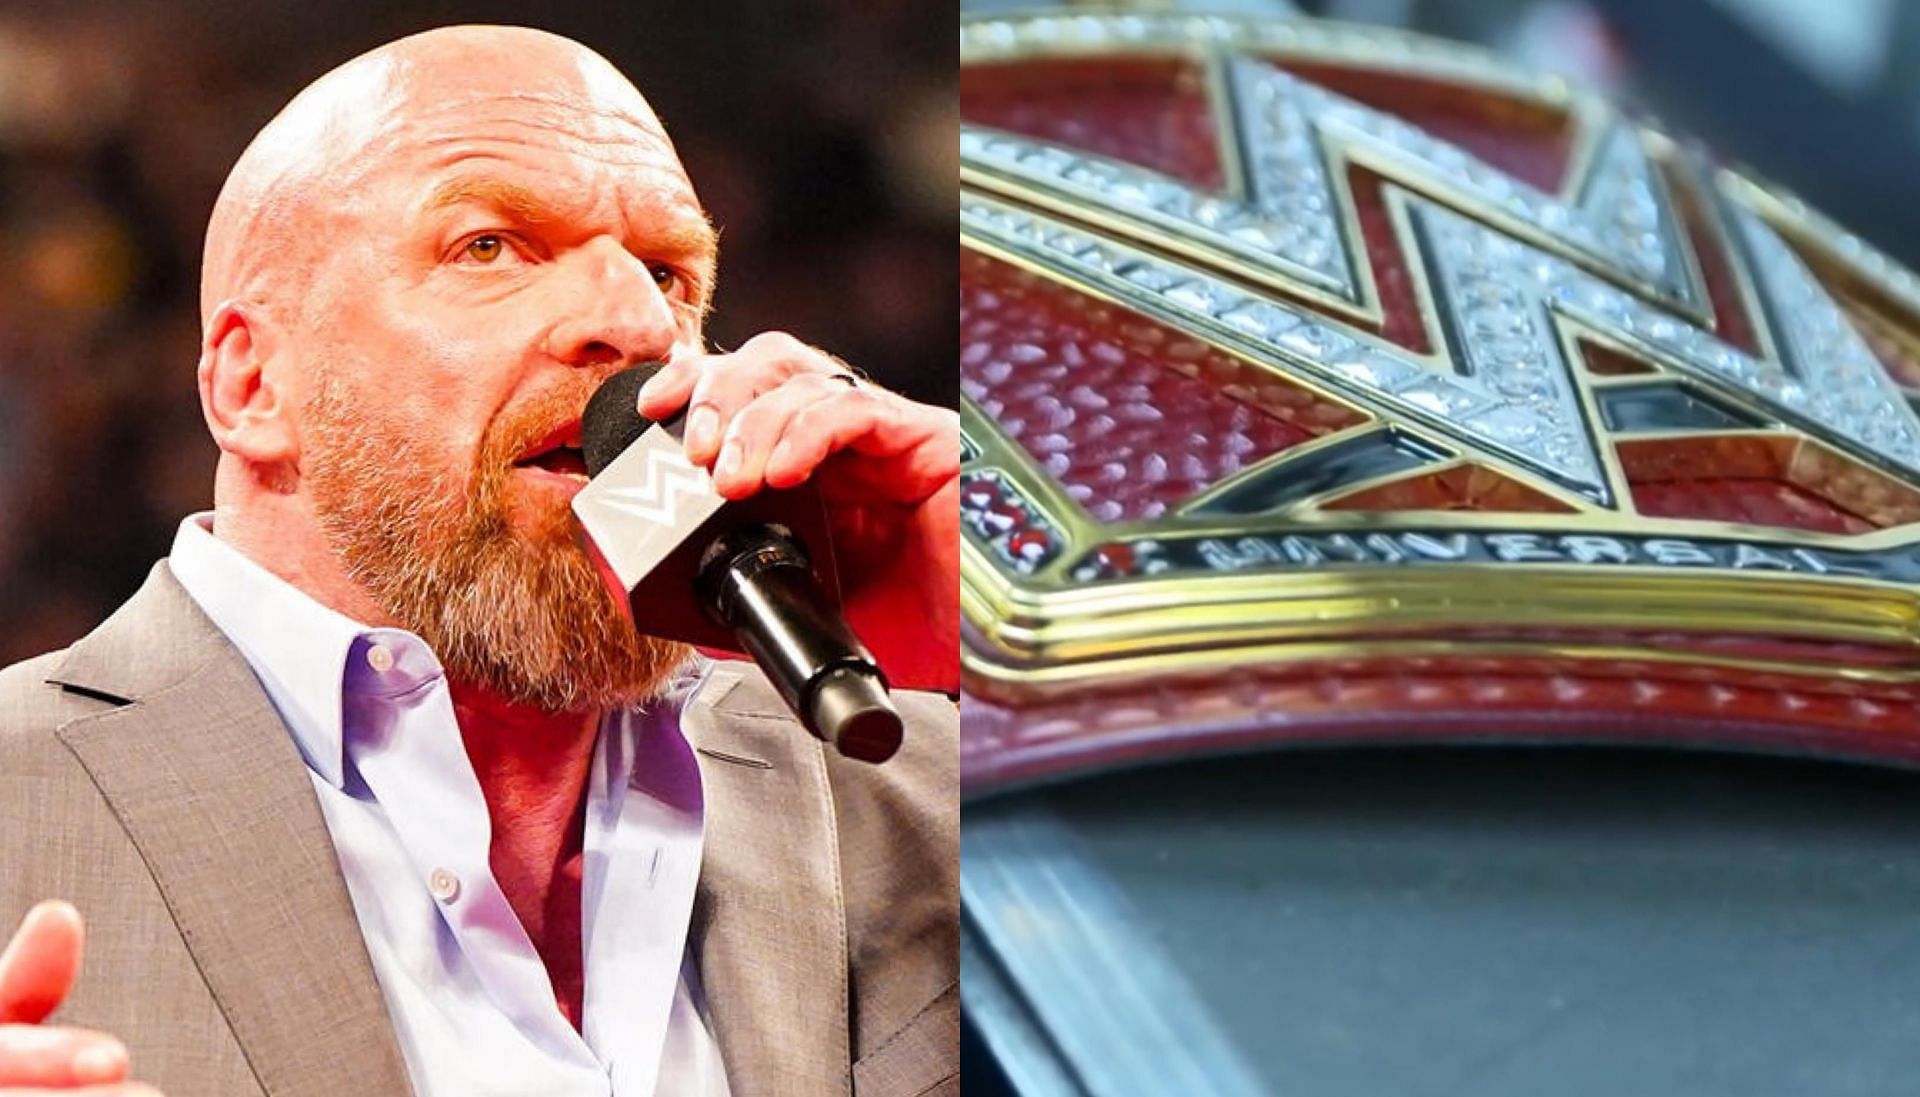 Will Triple H bring back former Universal Champion? (IMAGE SOURCE: WWE)